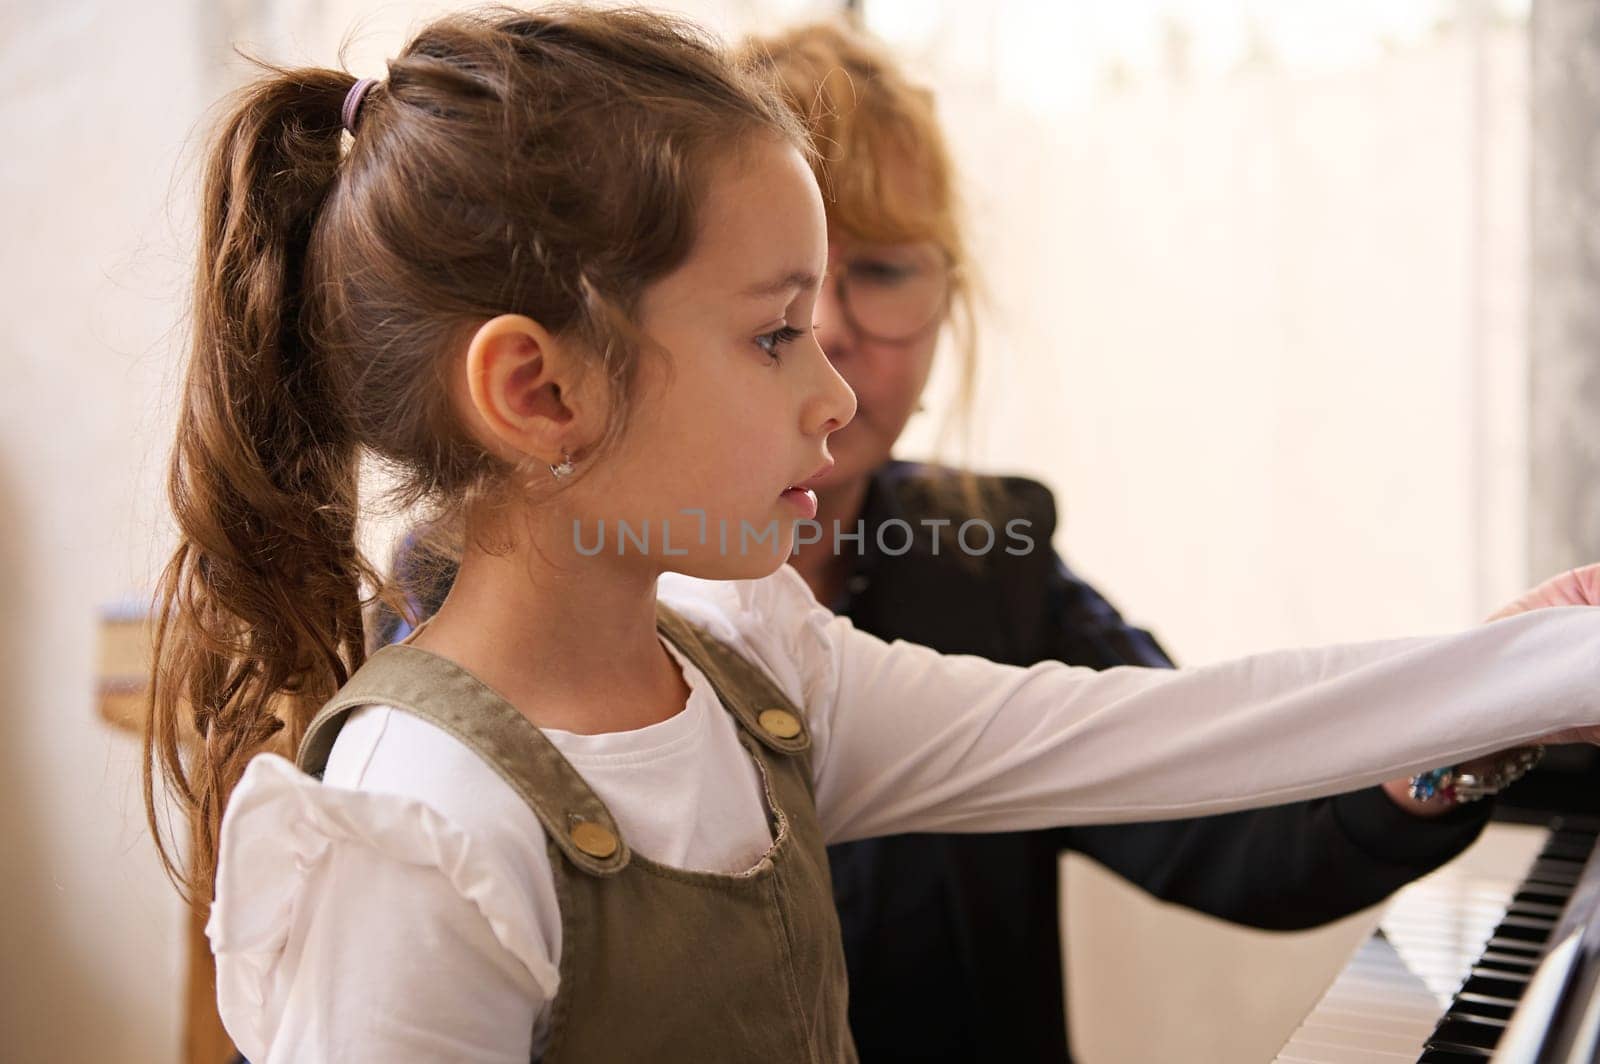 Lovely child girl engaged on playing piano with a teacher musician and pianist during individual music lesson at home by artgf